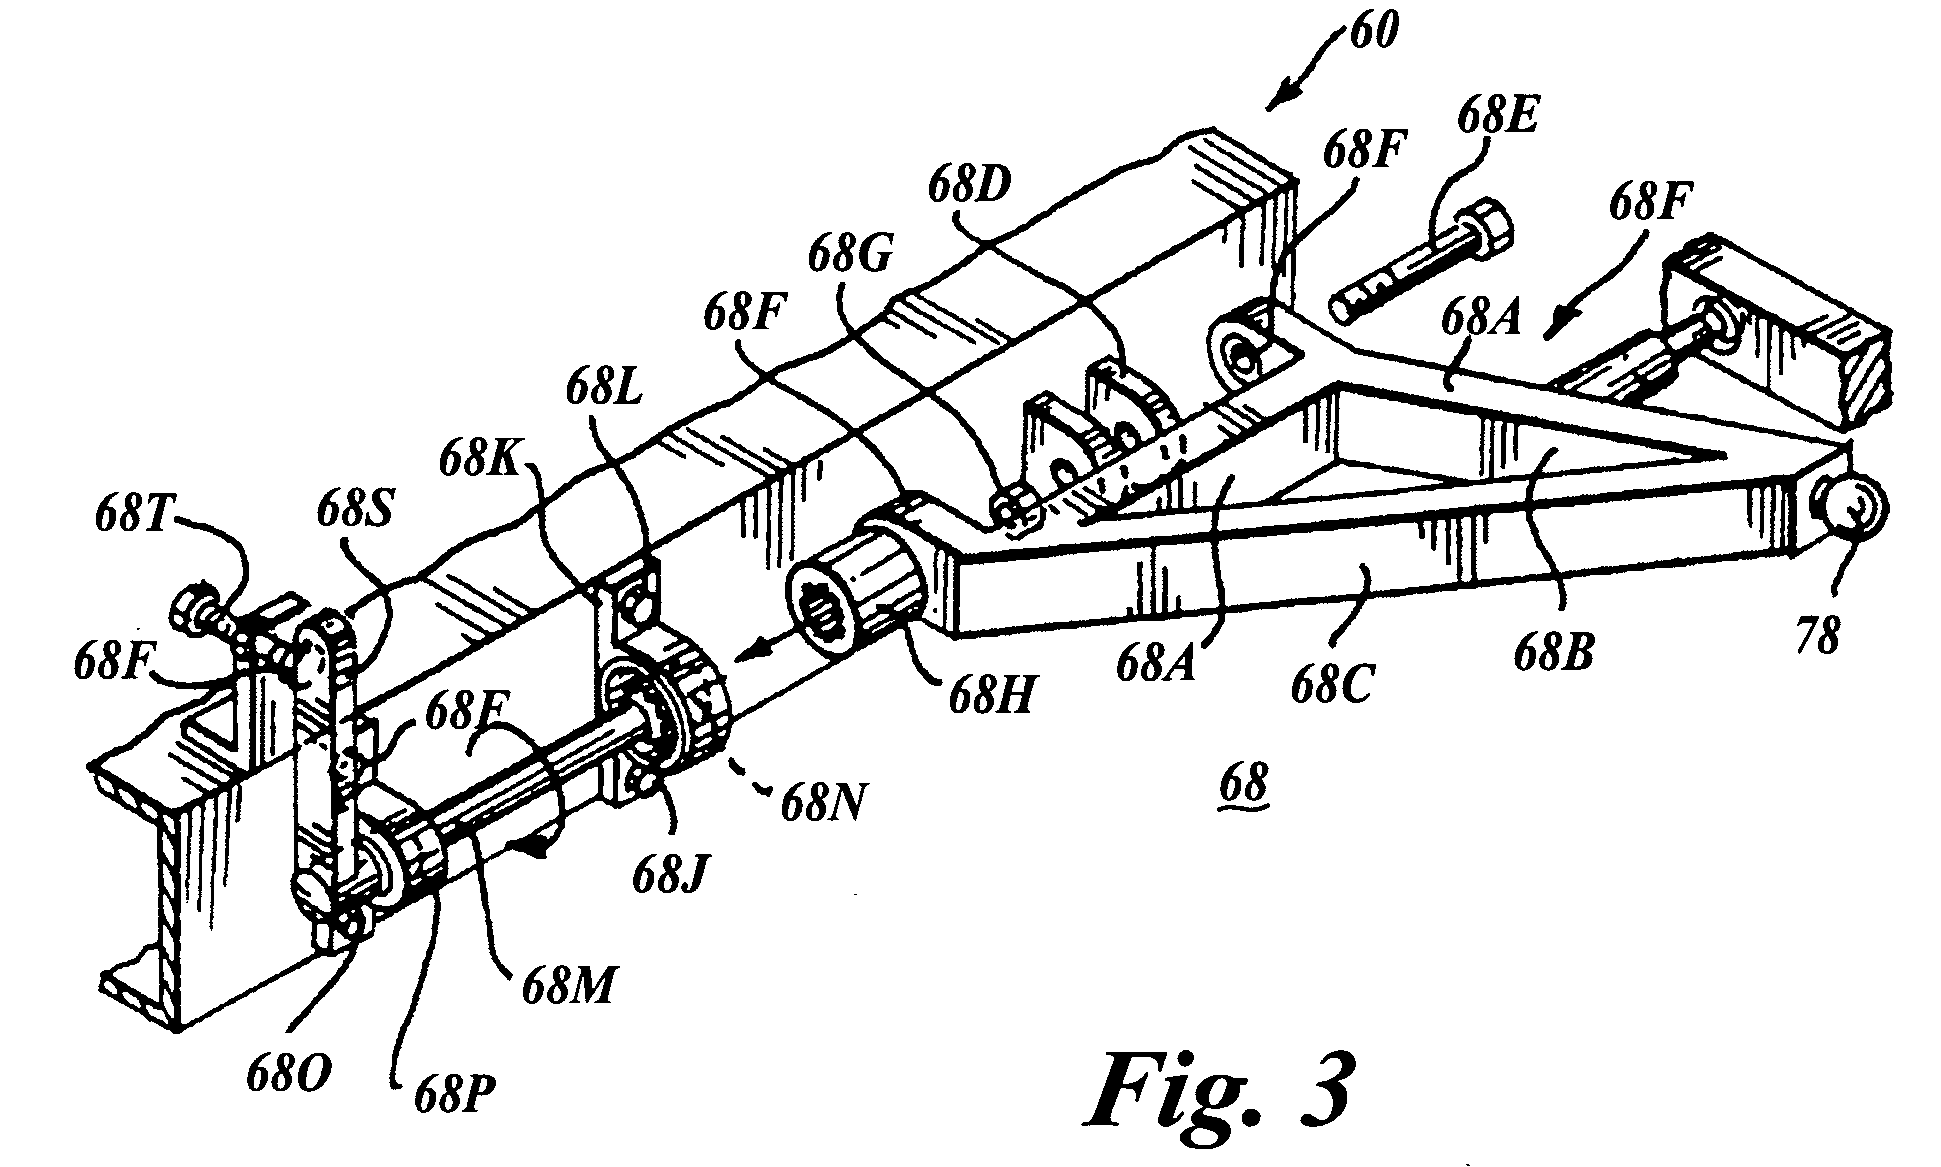 Vehicle with movable and inwardly tilting safety body